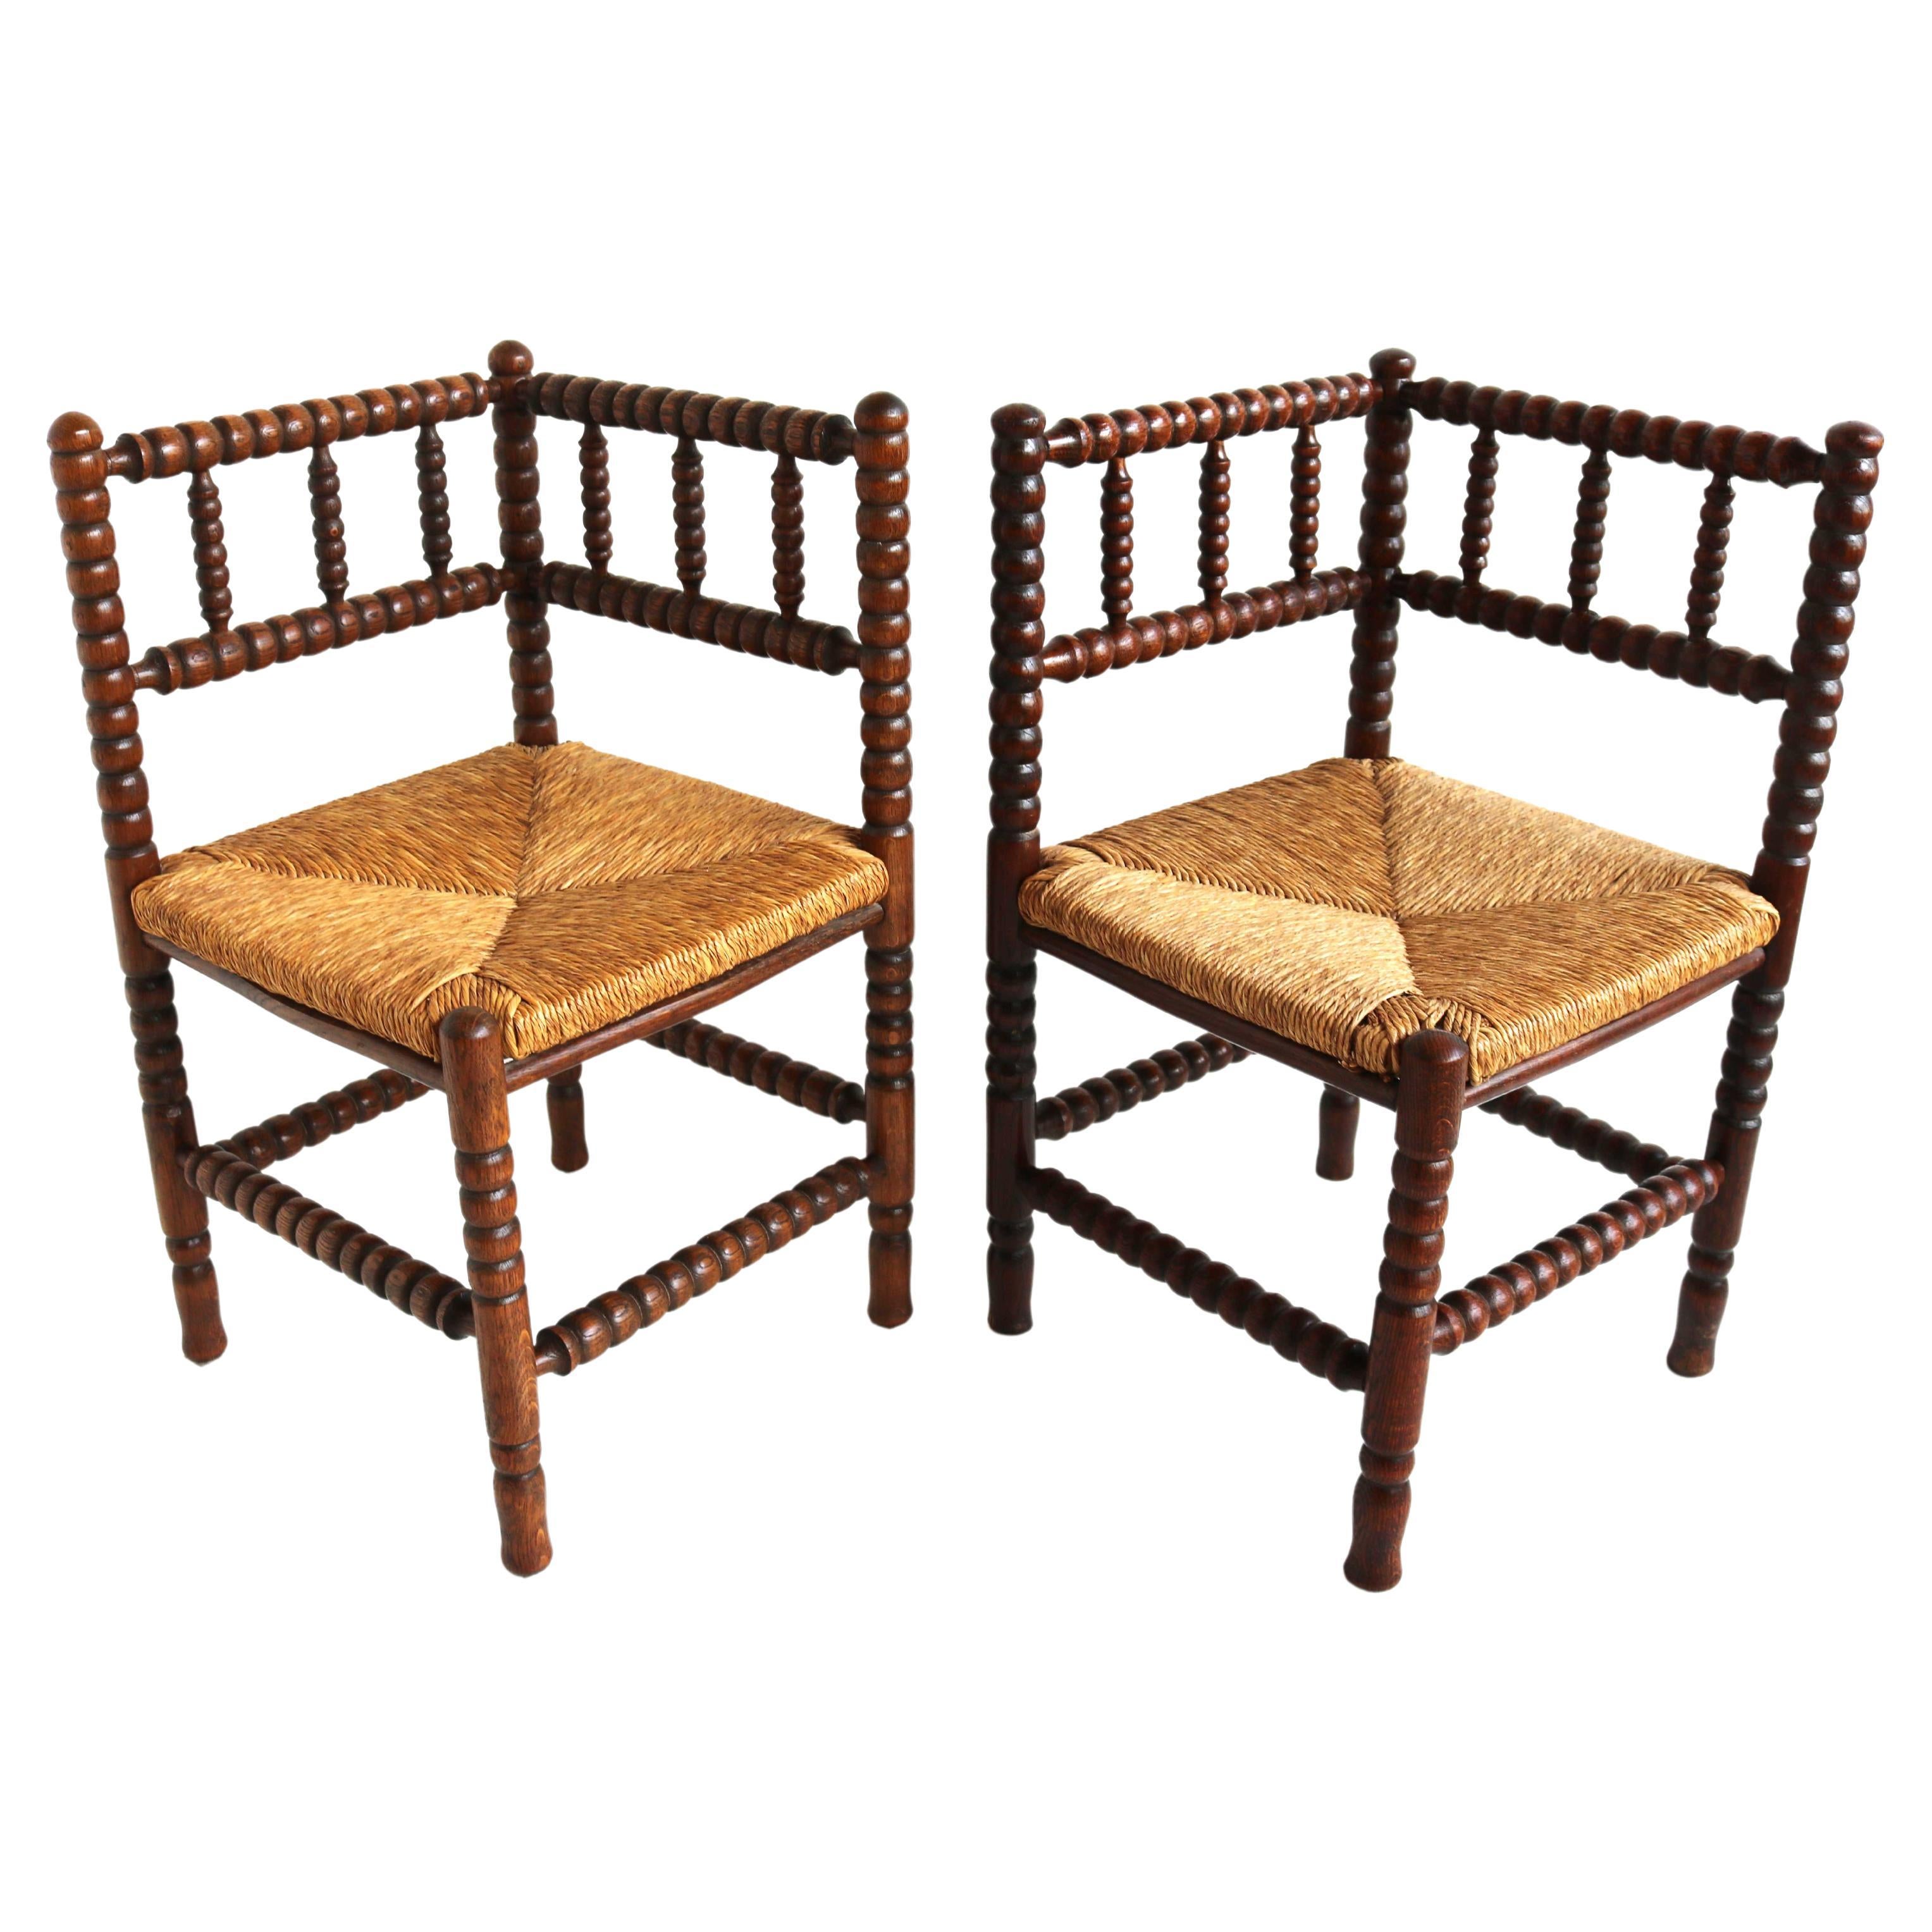 Pair Antique Rush-Seat Corner Bobbin Side Knitting Chairs in Turned Oak and Cane, Dutch ca 1900, Country Living, Farmhouse Decor.
Lovely couple typical Dutch knitting chairs, with minimal differences.
This antique 'corner chair' with wicker seat